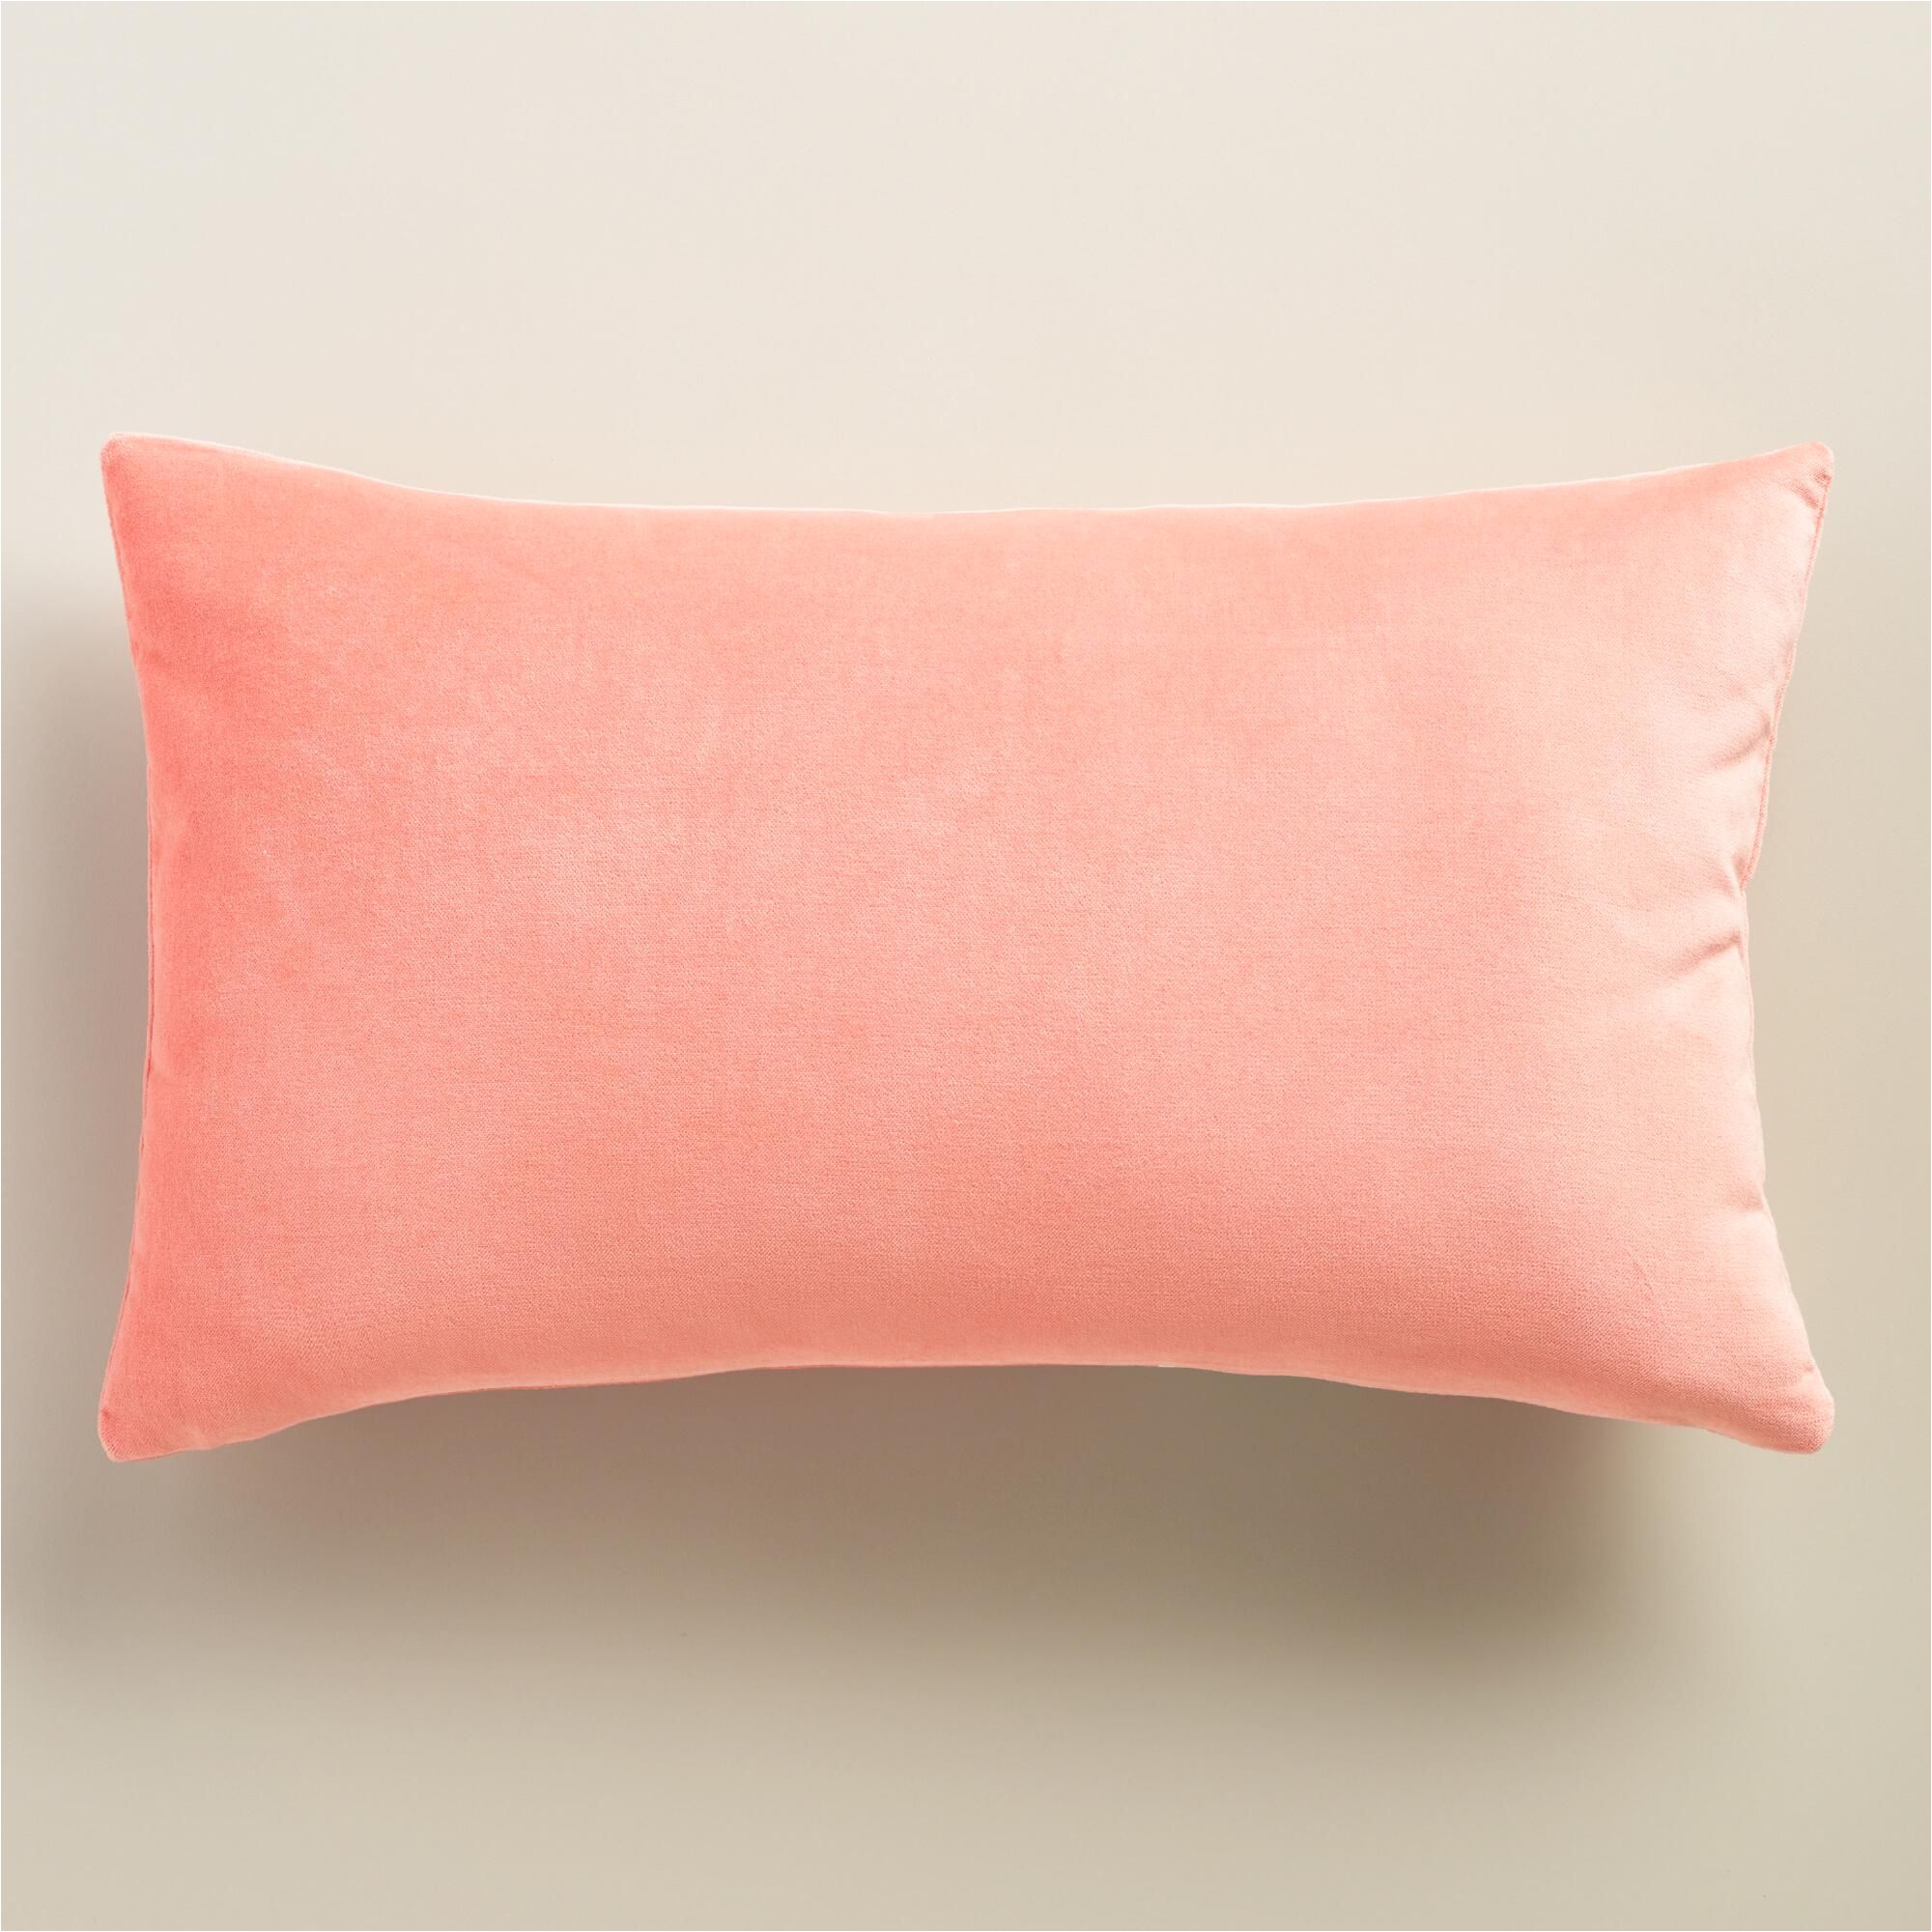 crafted of luxurious cotton velvet our soft pink lumbar pillow is a plush update for